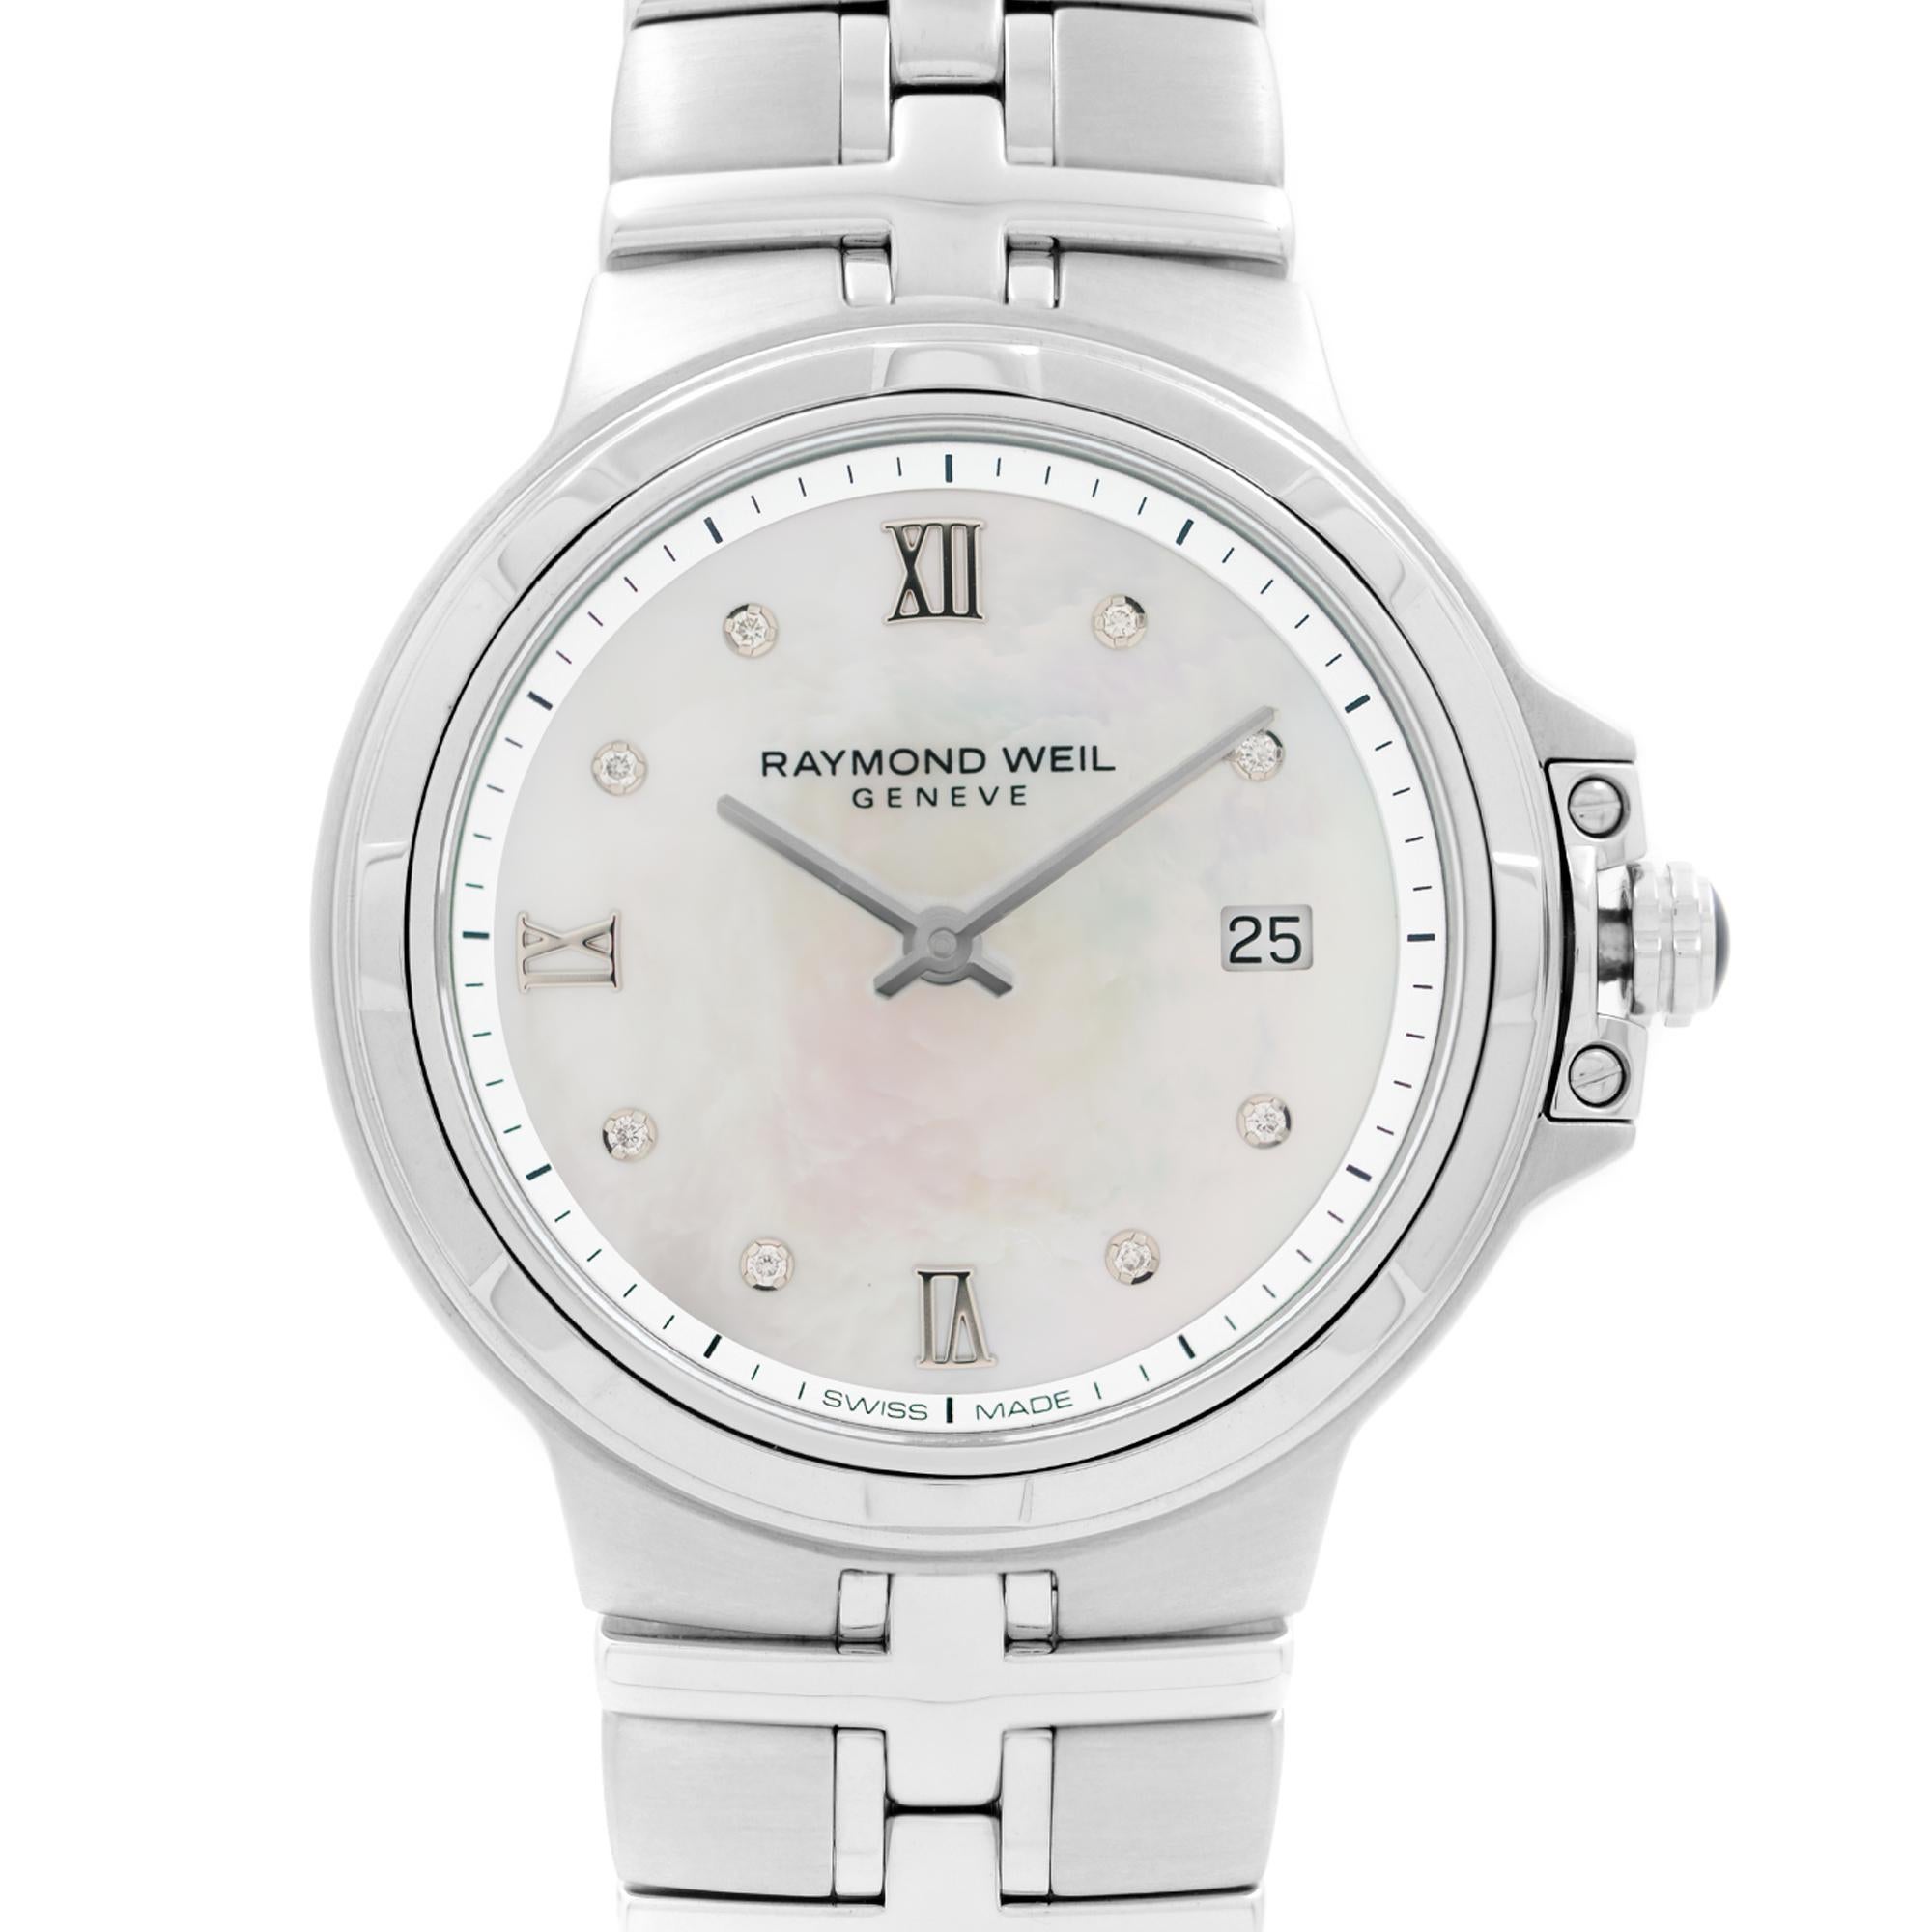 The watch has never been worn or used. Comes with an original box and papers. 


MSRP 1550
Brand RAYMOND WEIL
Department Women
Model Number 5180-ST-00995
Country/Region of Manufacture Switzerland
Model Raymond Weil Parsifal
Style